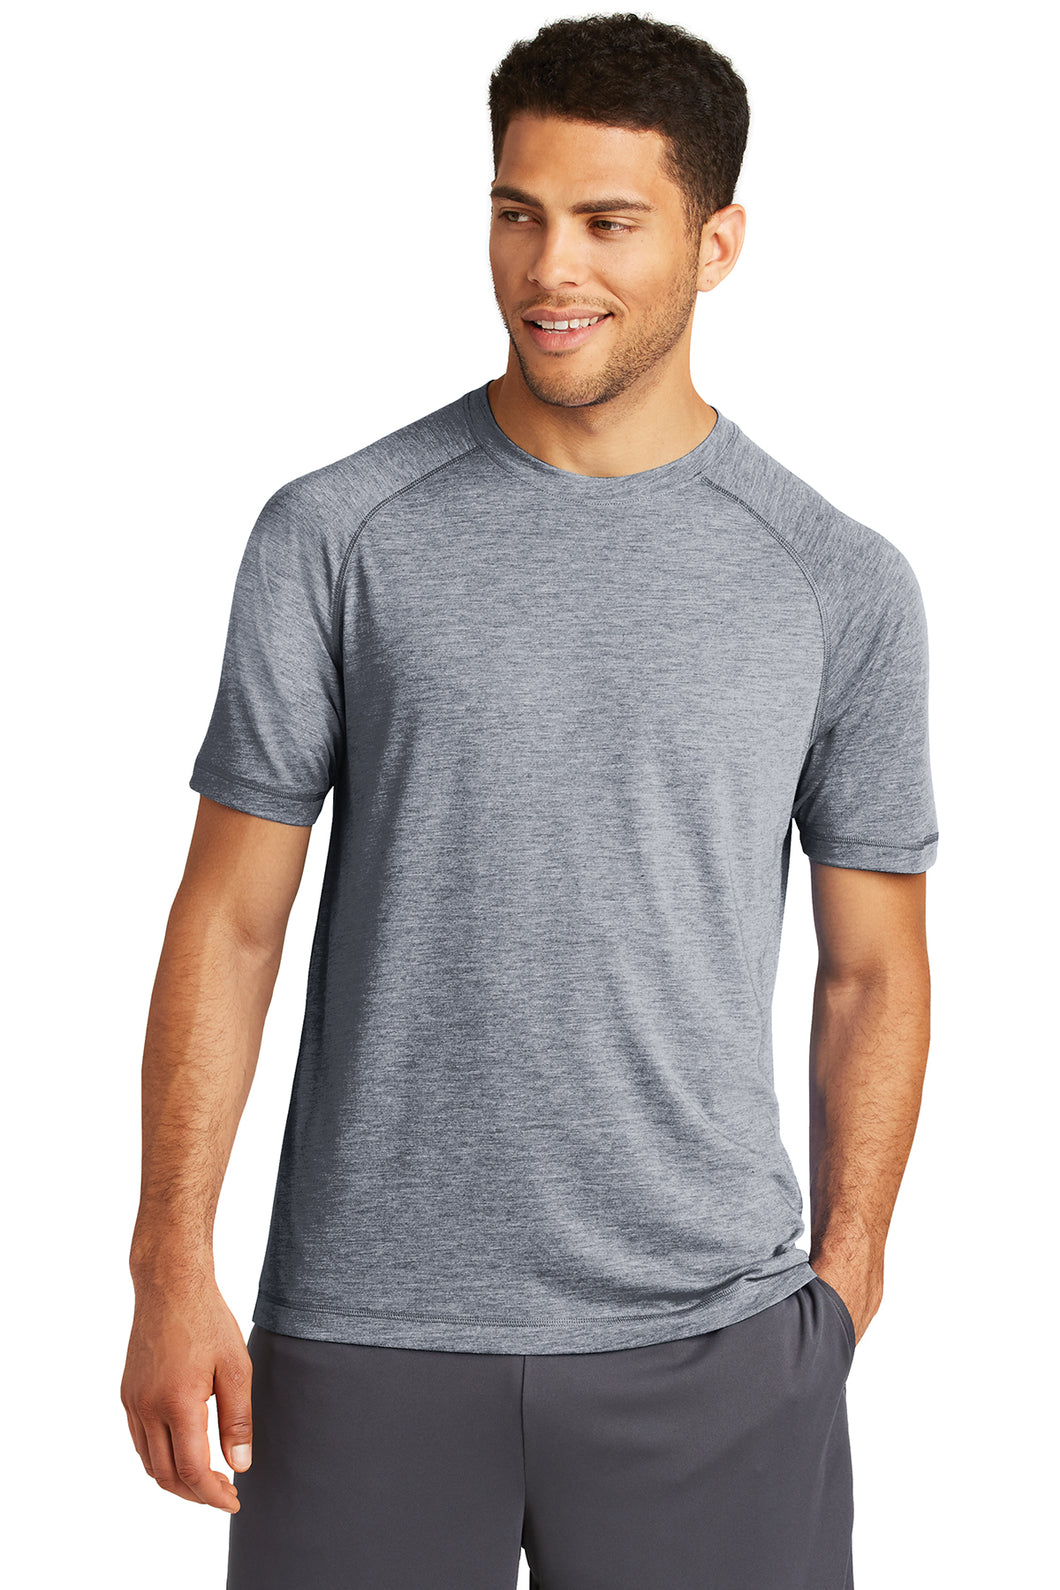 Fusion Performance Top - Navy